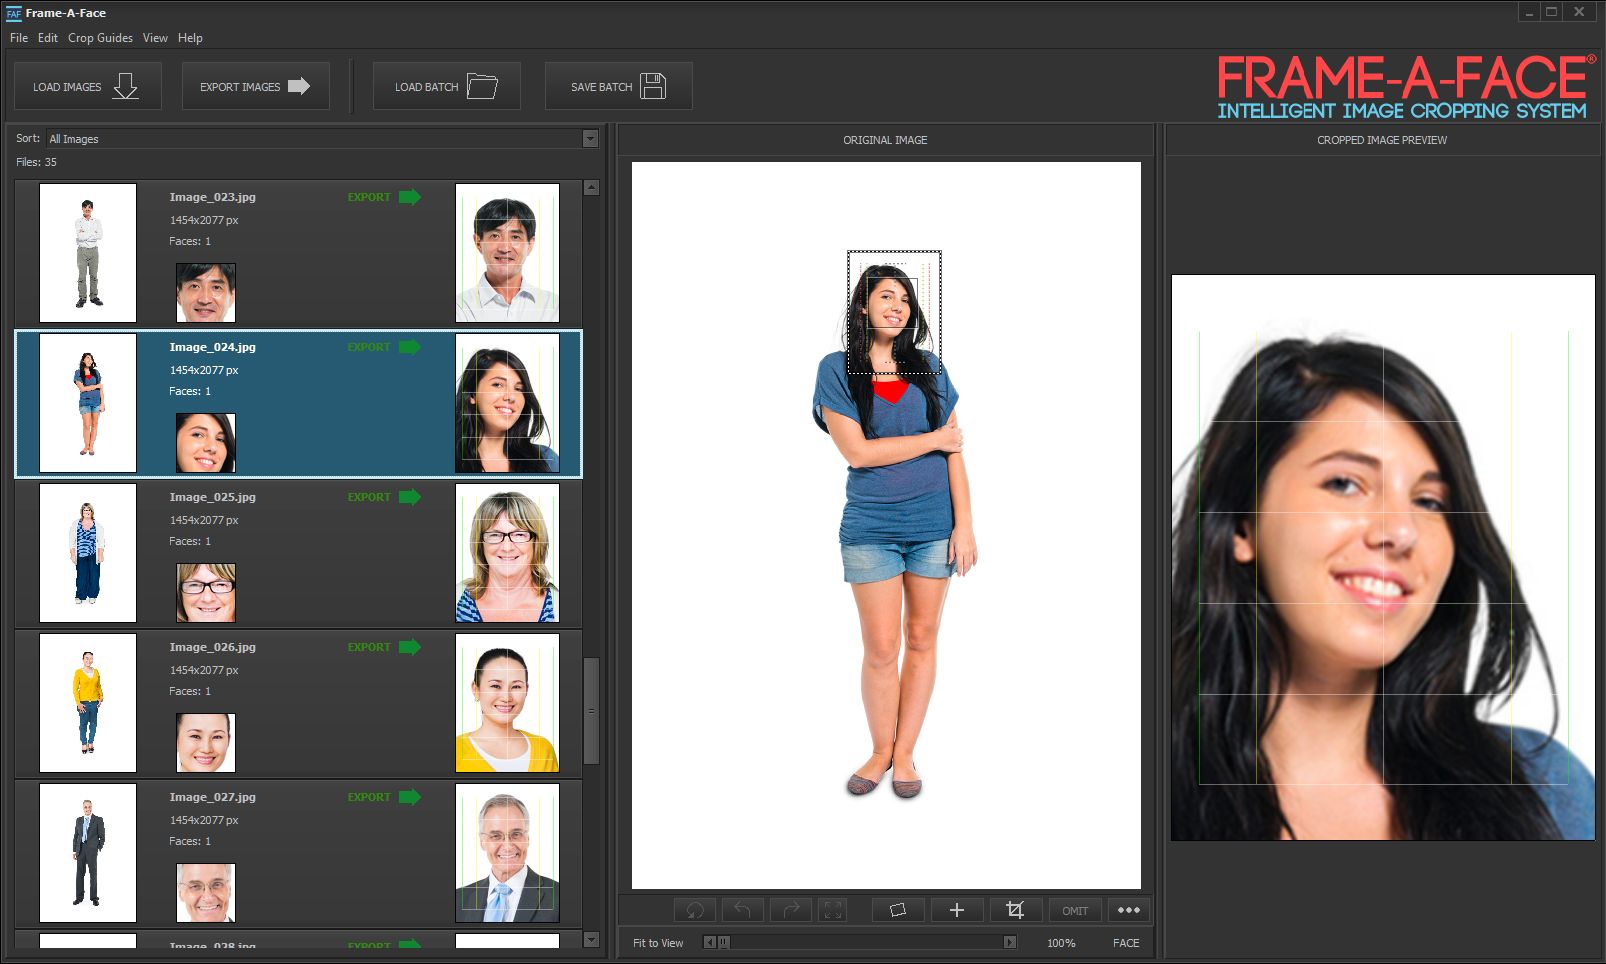 Frame-A-Face - Intelligent Image Cropping System!